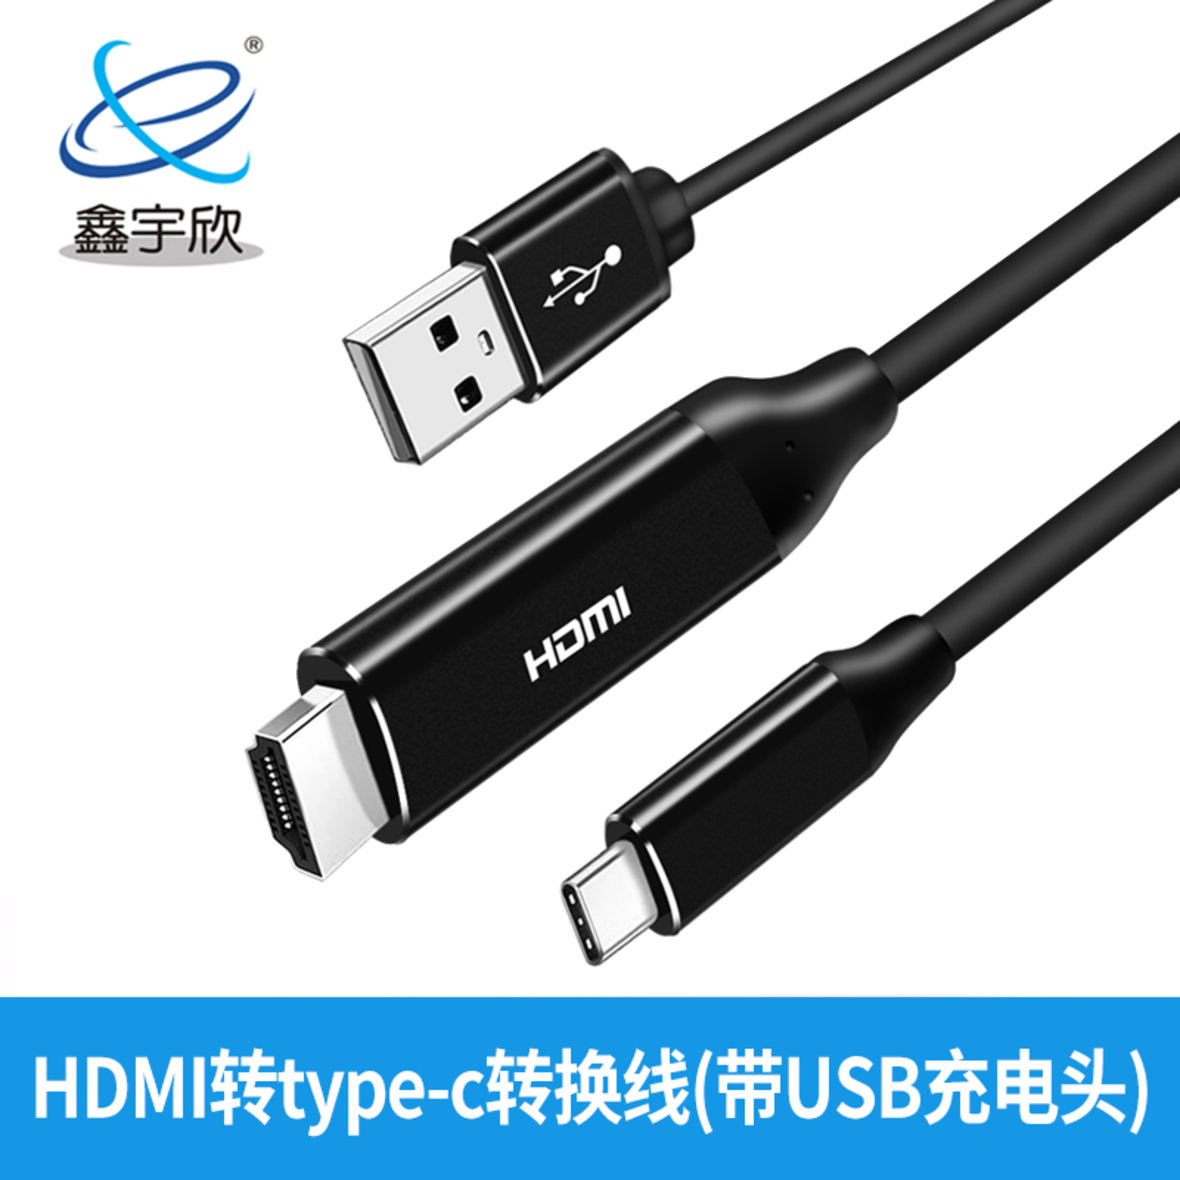 HDMI to Type-c audio and video conversion cable with USB charging cable